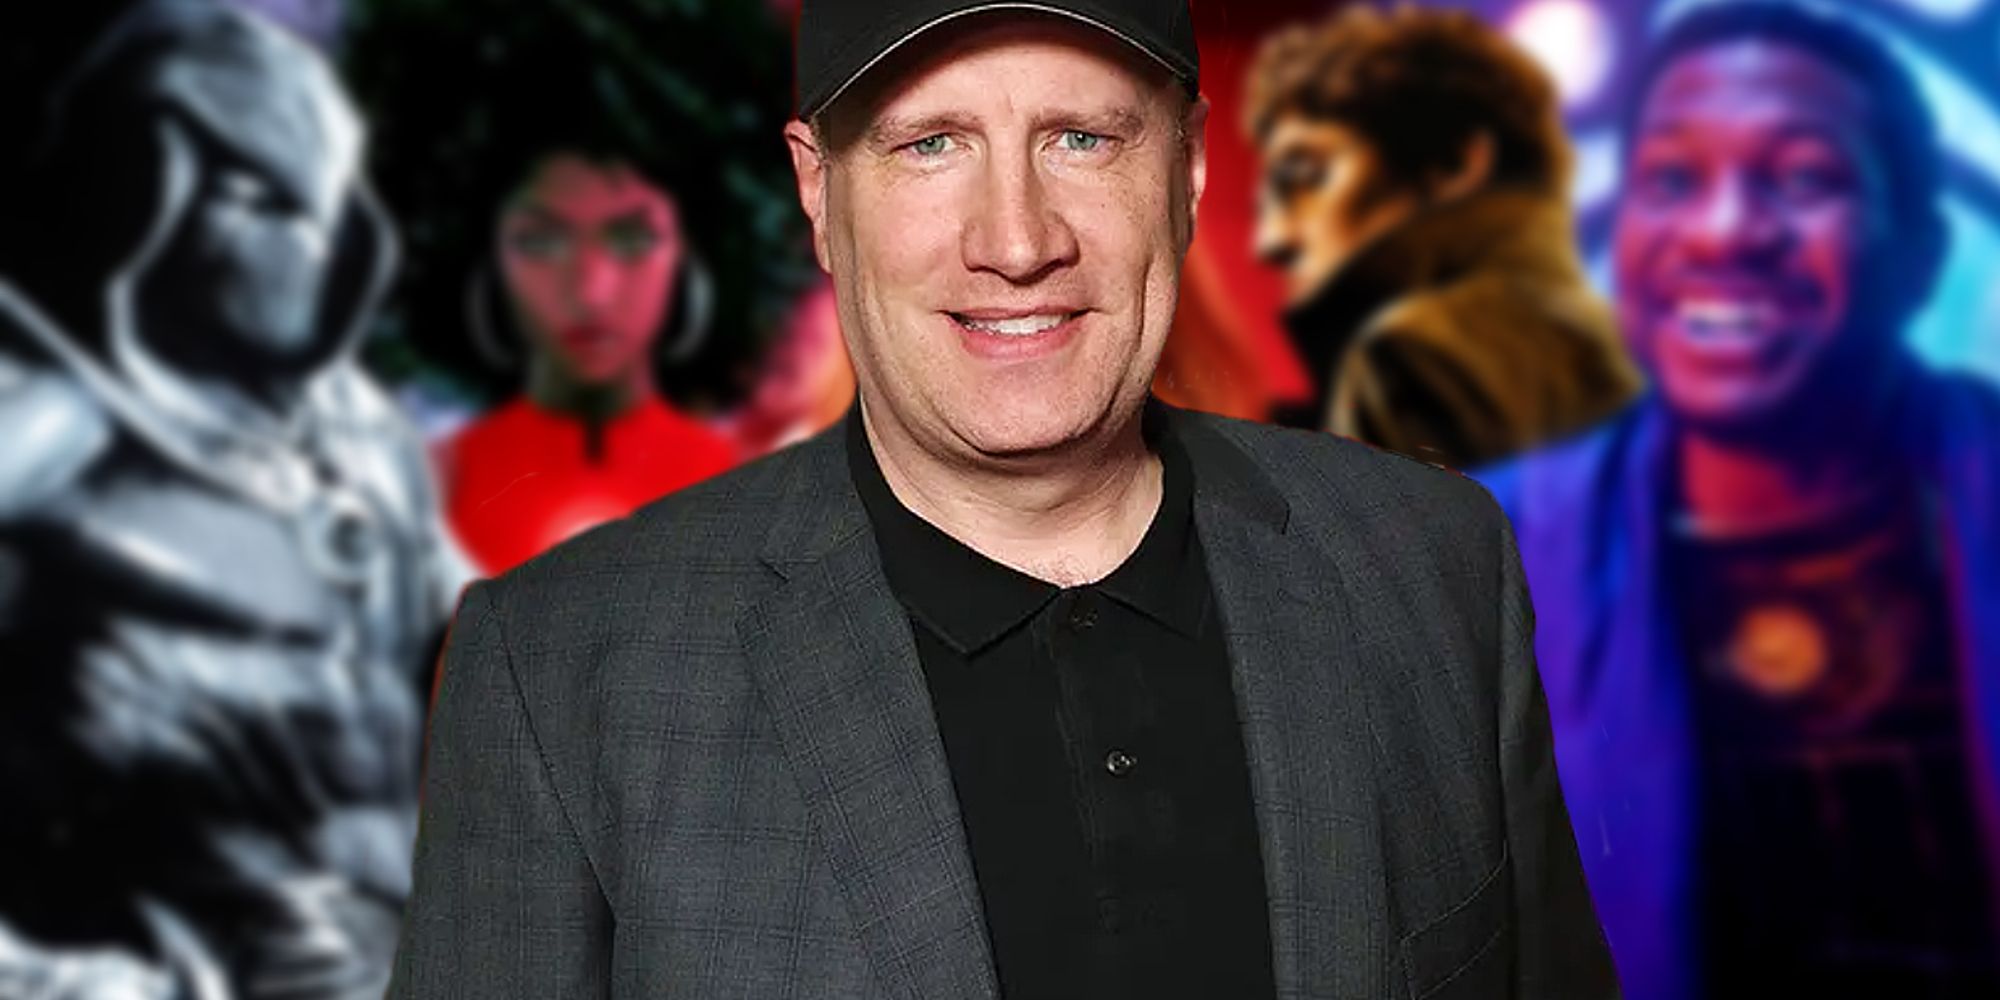 A blurred out image of Phase 4 characters with Kevin Feige overlayed